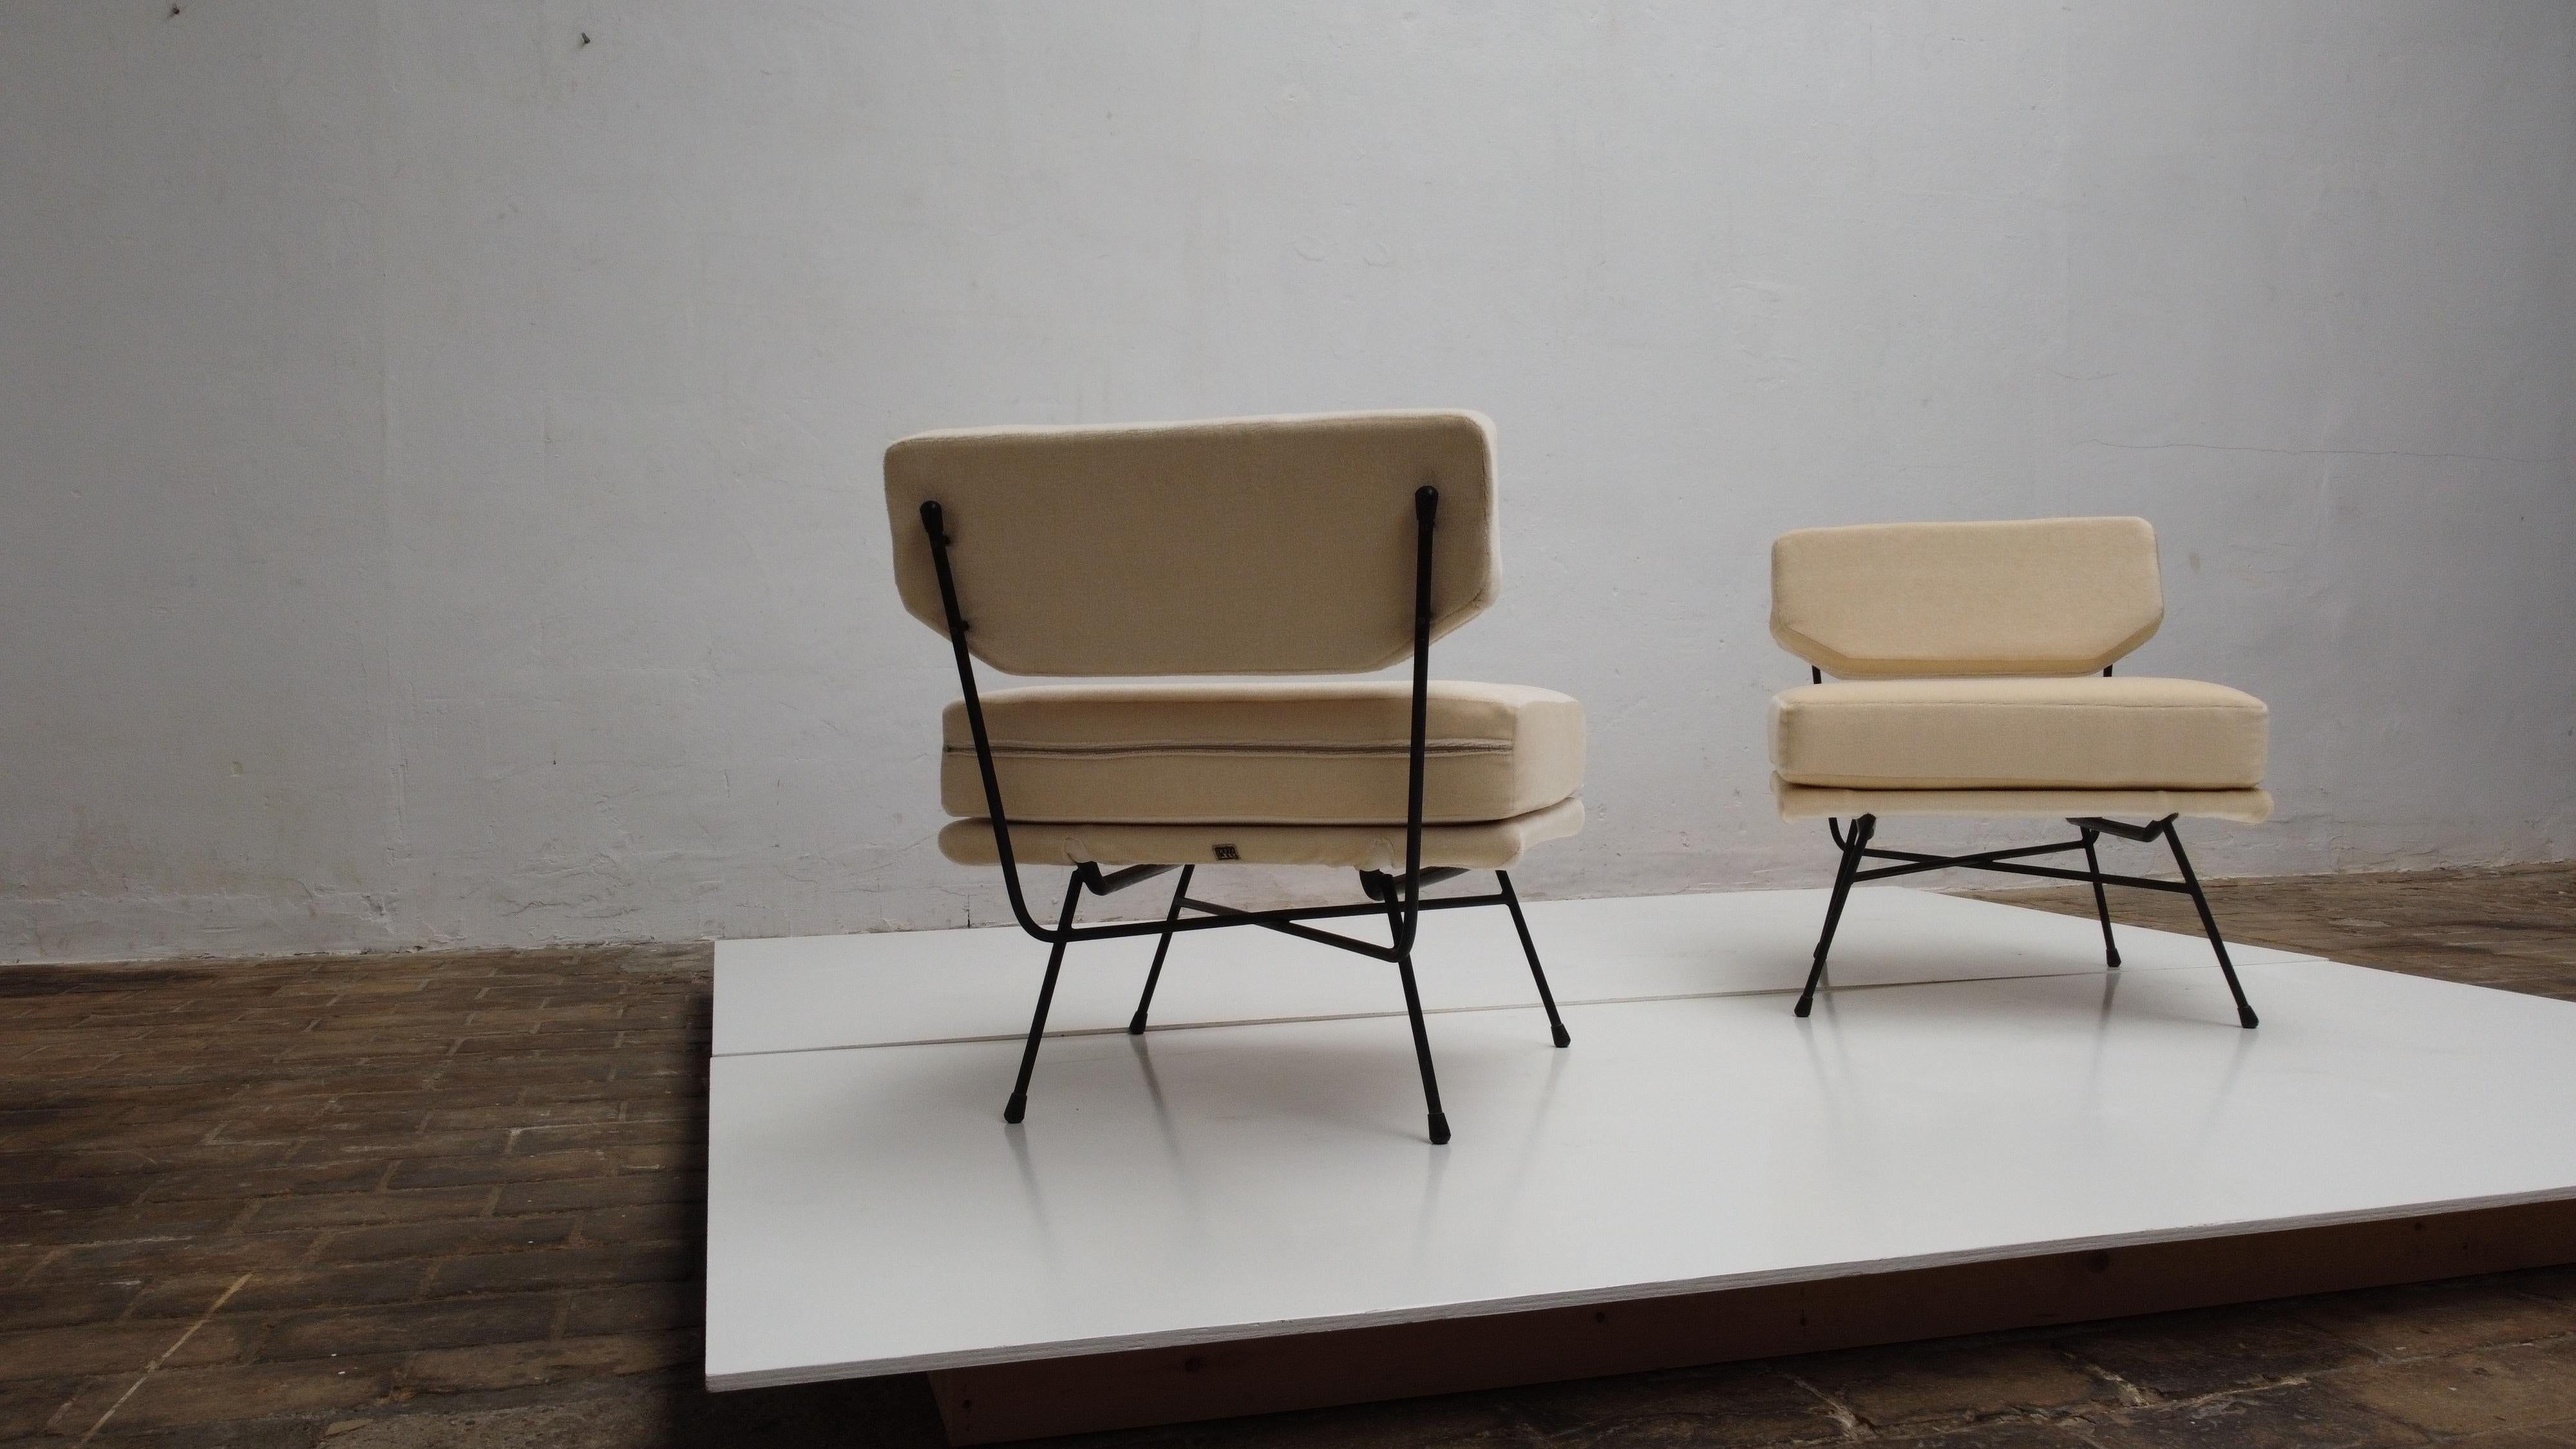 Italian Pair of 'Elettra' Lounge Chairs by BBPR, Arflex, Italy 1953, Compasso D'Oro 1954